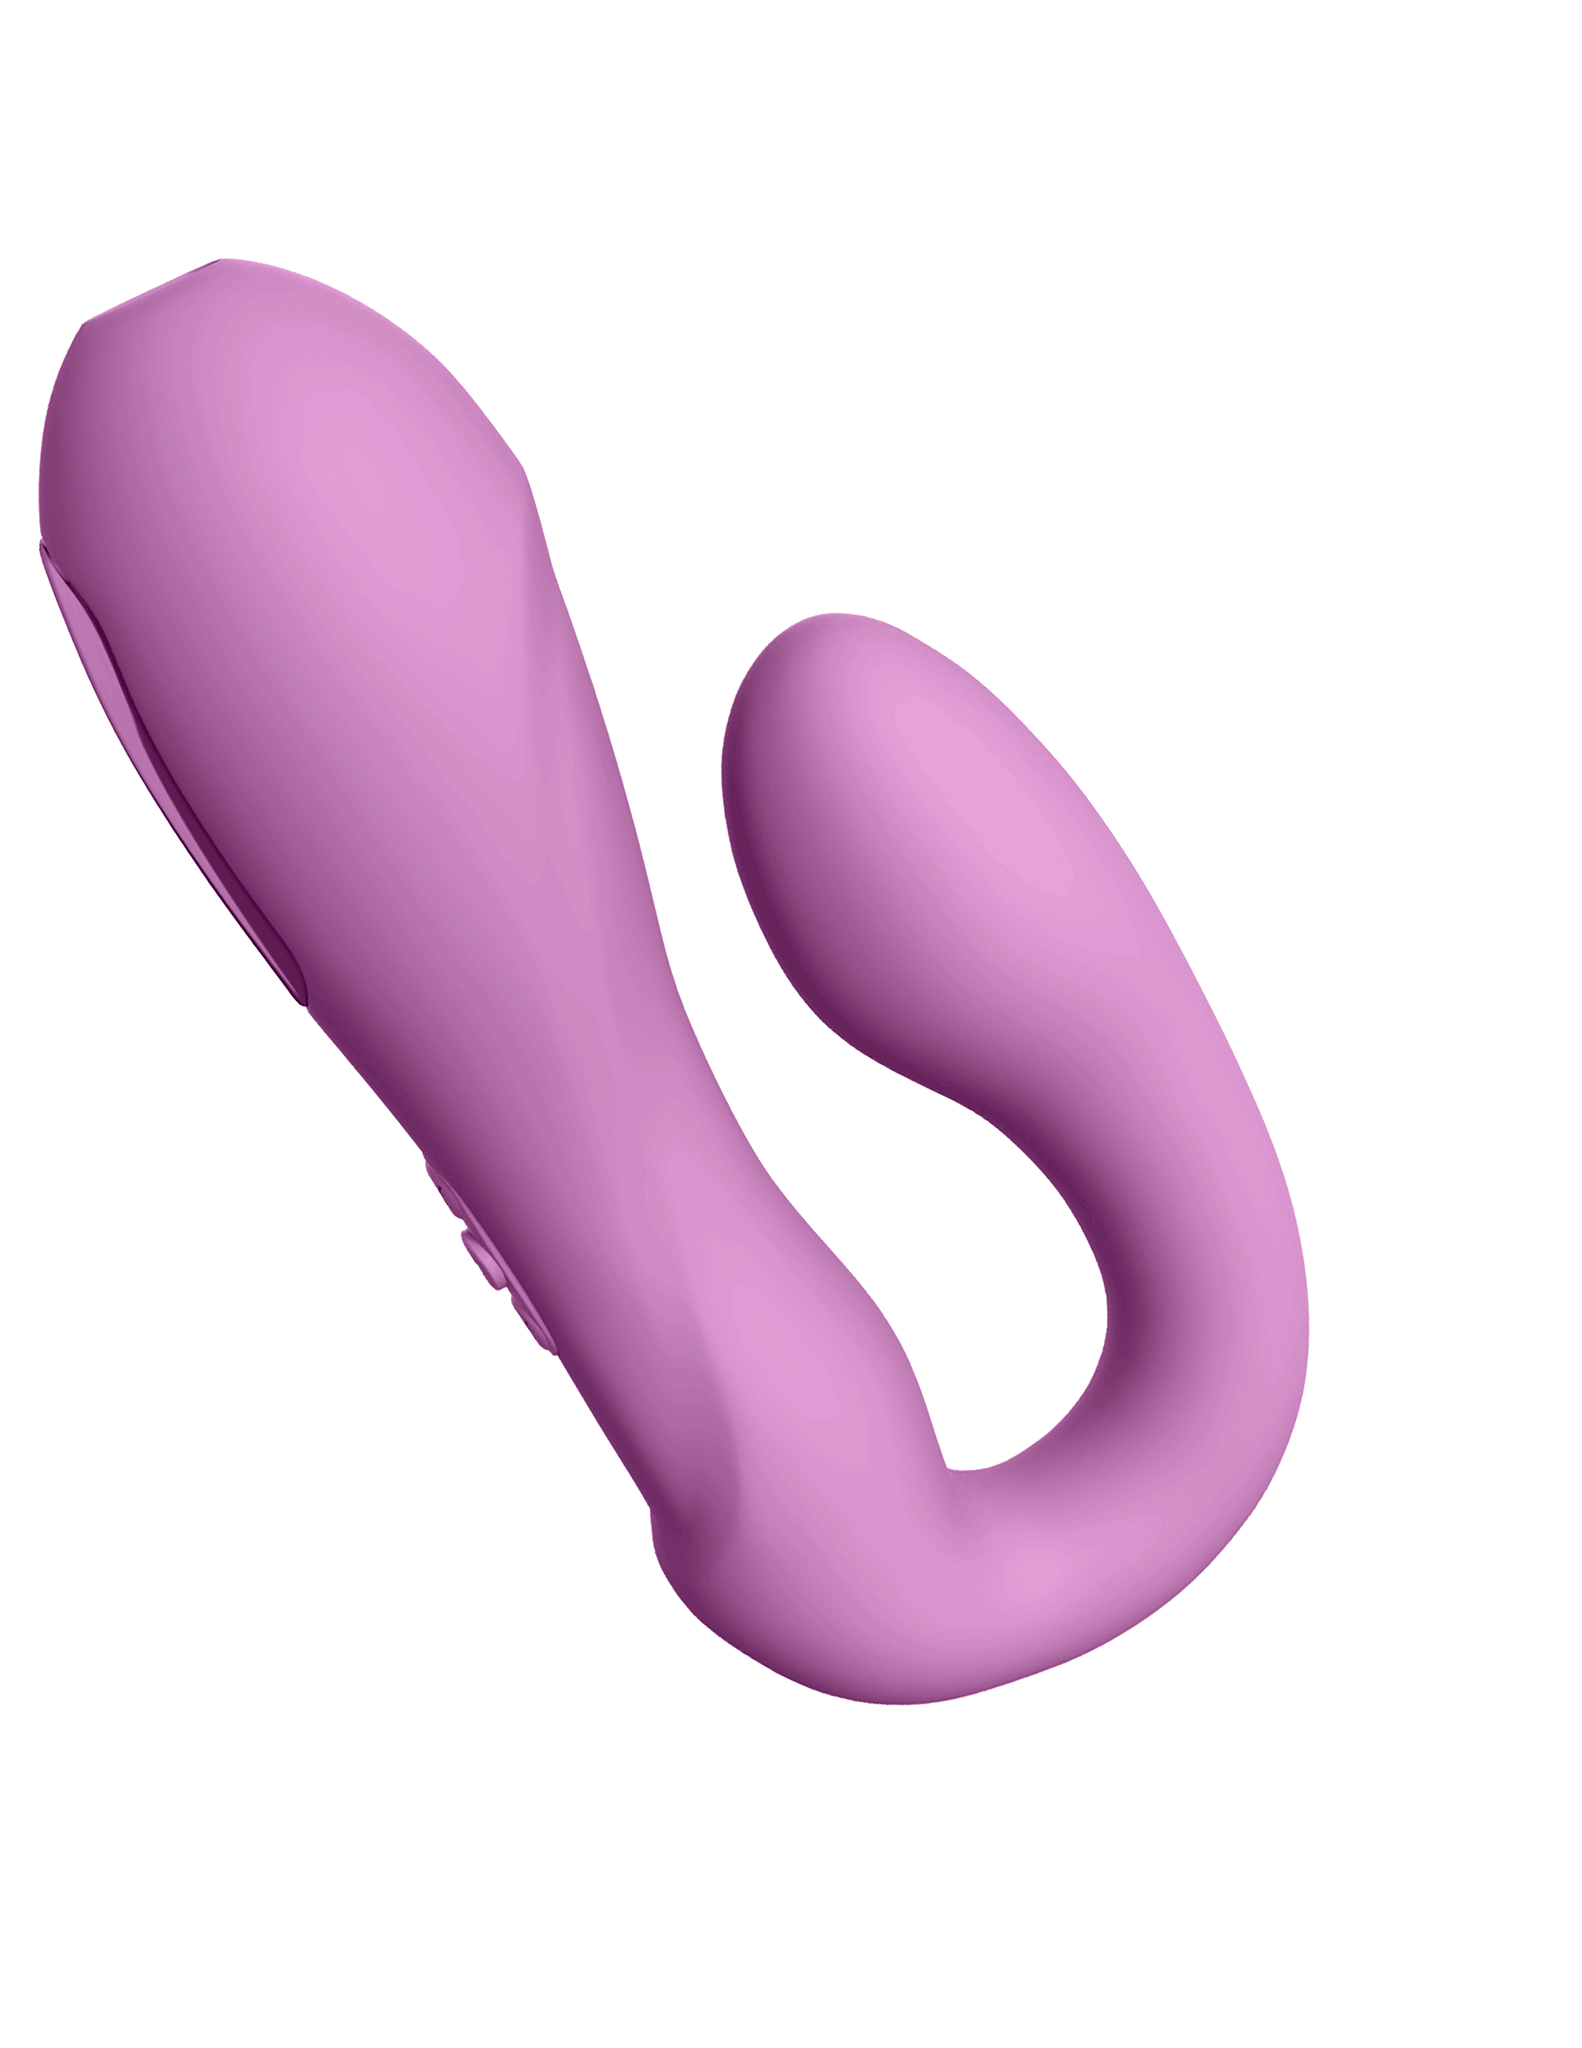 Reflexx Rabbit Vibrator purple with functions and animated image